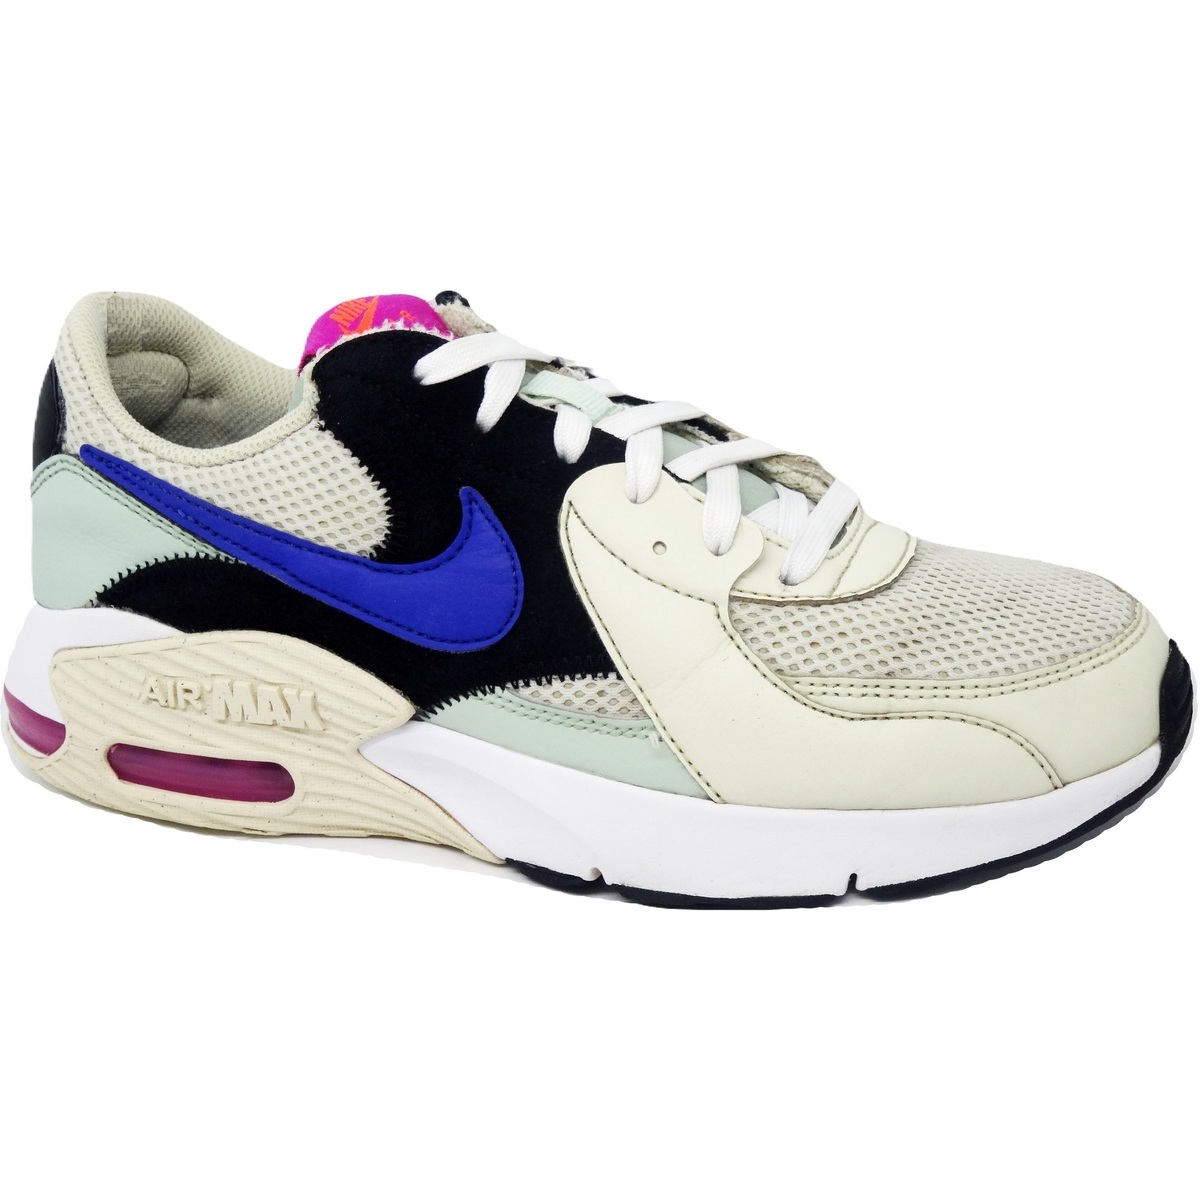 Basket Nike Reconditionne Air max Excee   27779547 1200 A